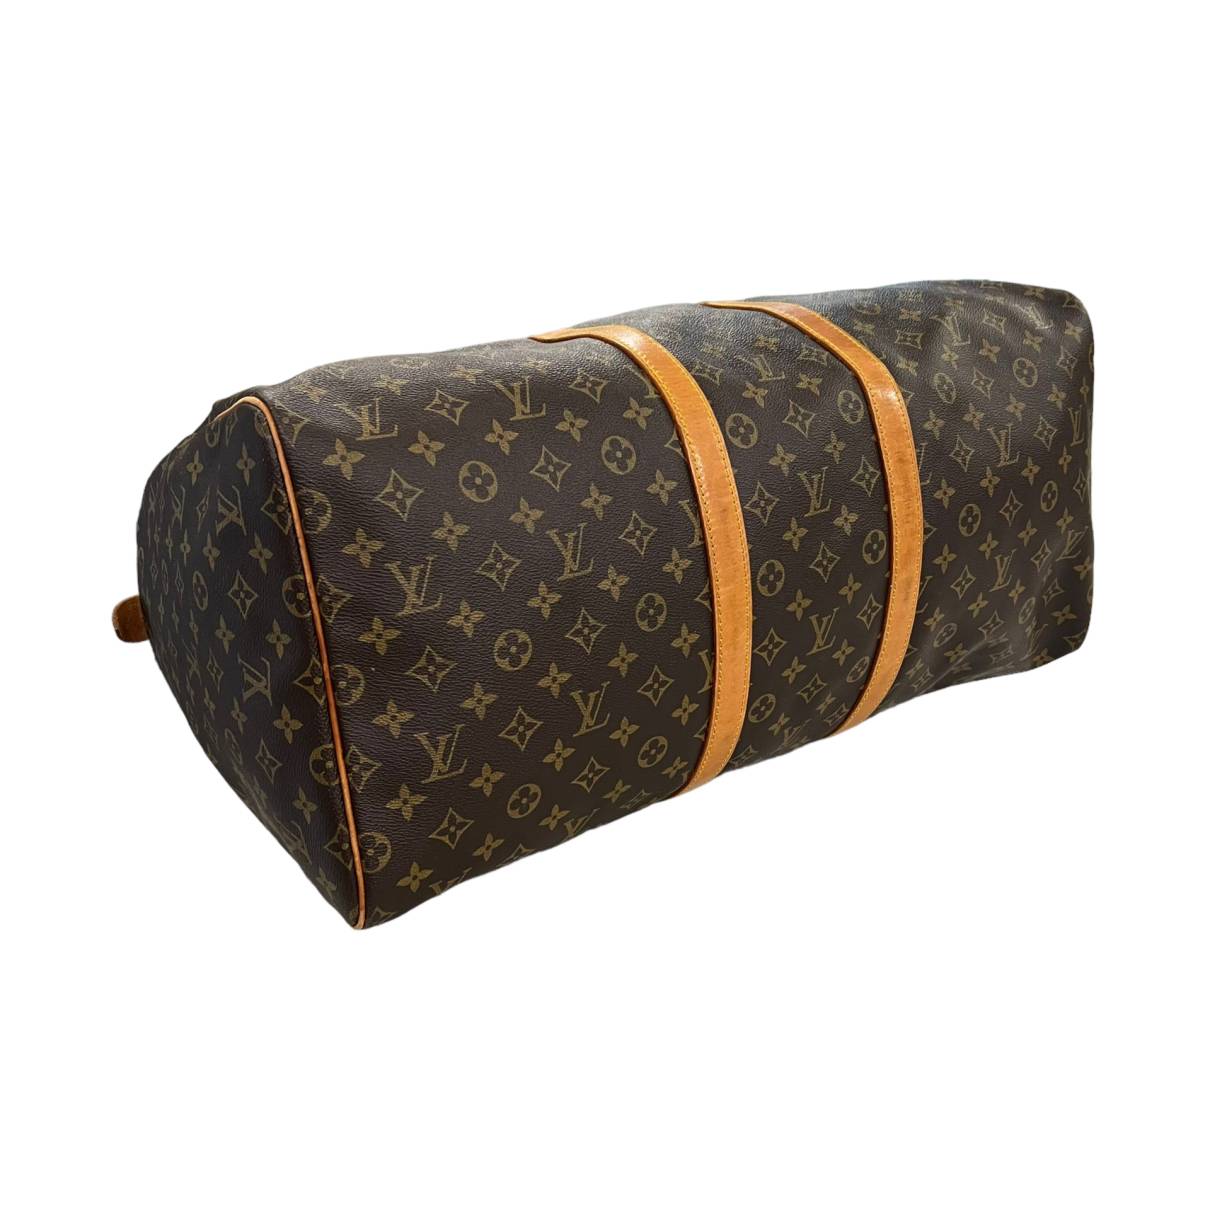 Louis Vuitton Travel Luggage for sale